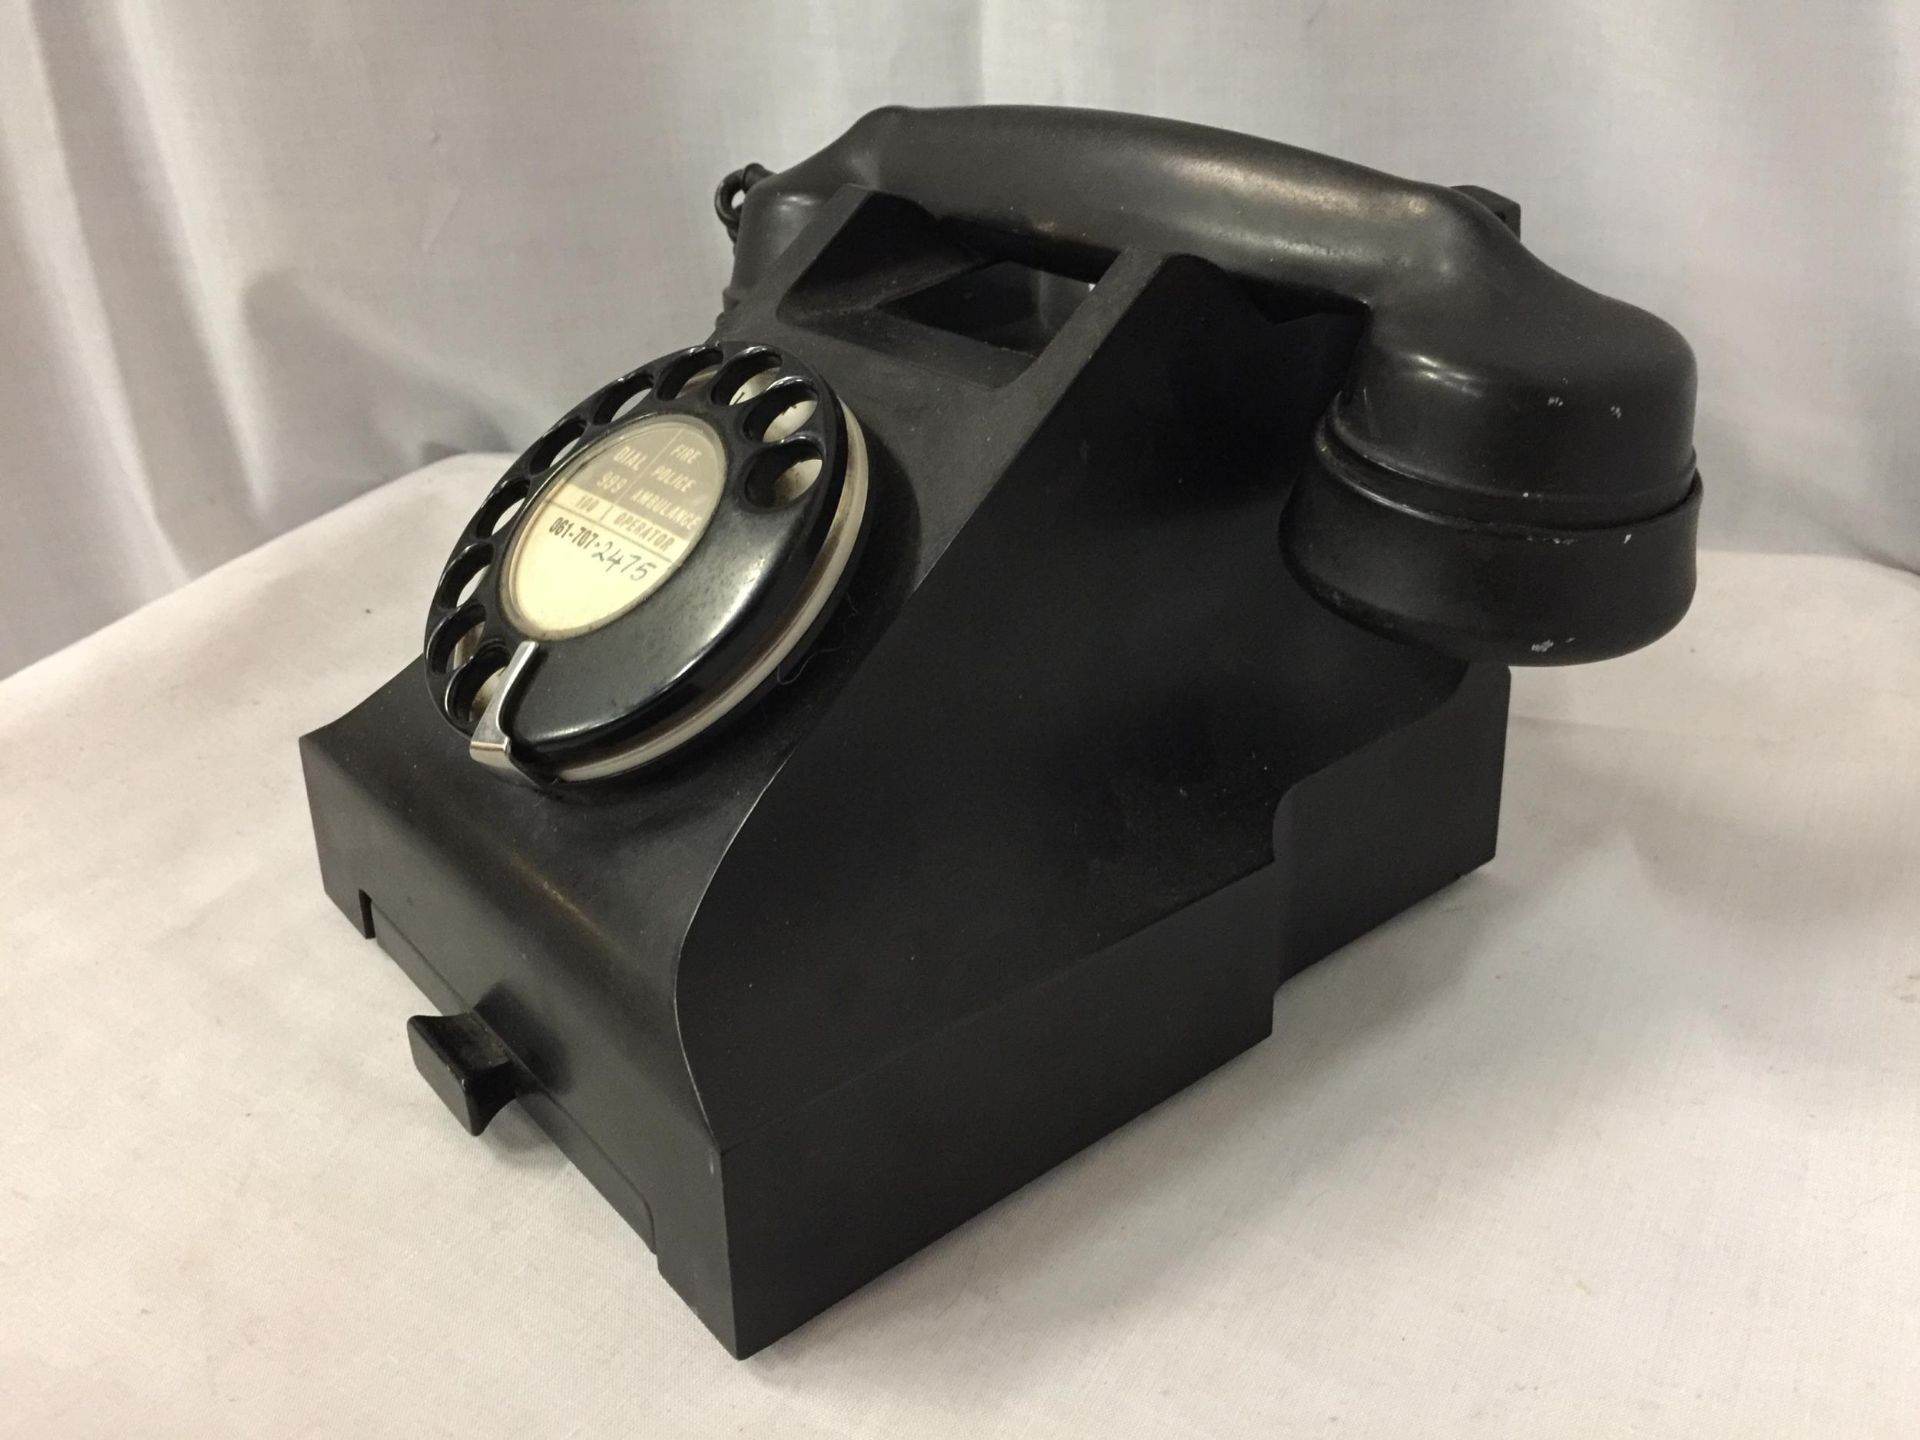 A VINTAGE BLACK 1950'S BAKELITE GPO ROTARY DIAL TELEPHONE WITH PULL OUT CARD TRAY - Image 2 of 4